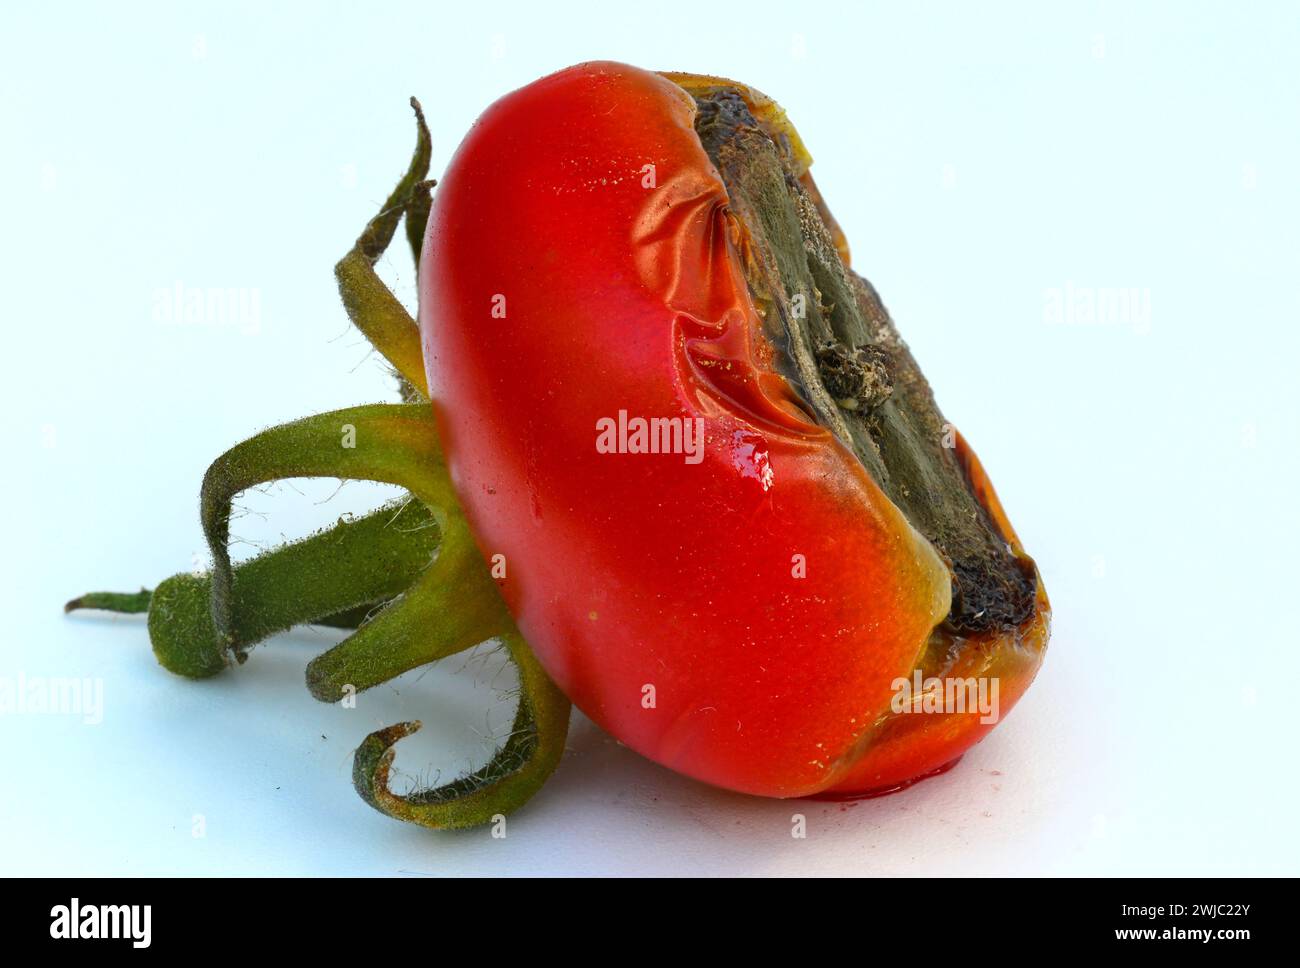 Tomato fruit affected by Blackened Fruit End - due to blossom end rot, which signals a calcium deficiency. Stock Photo